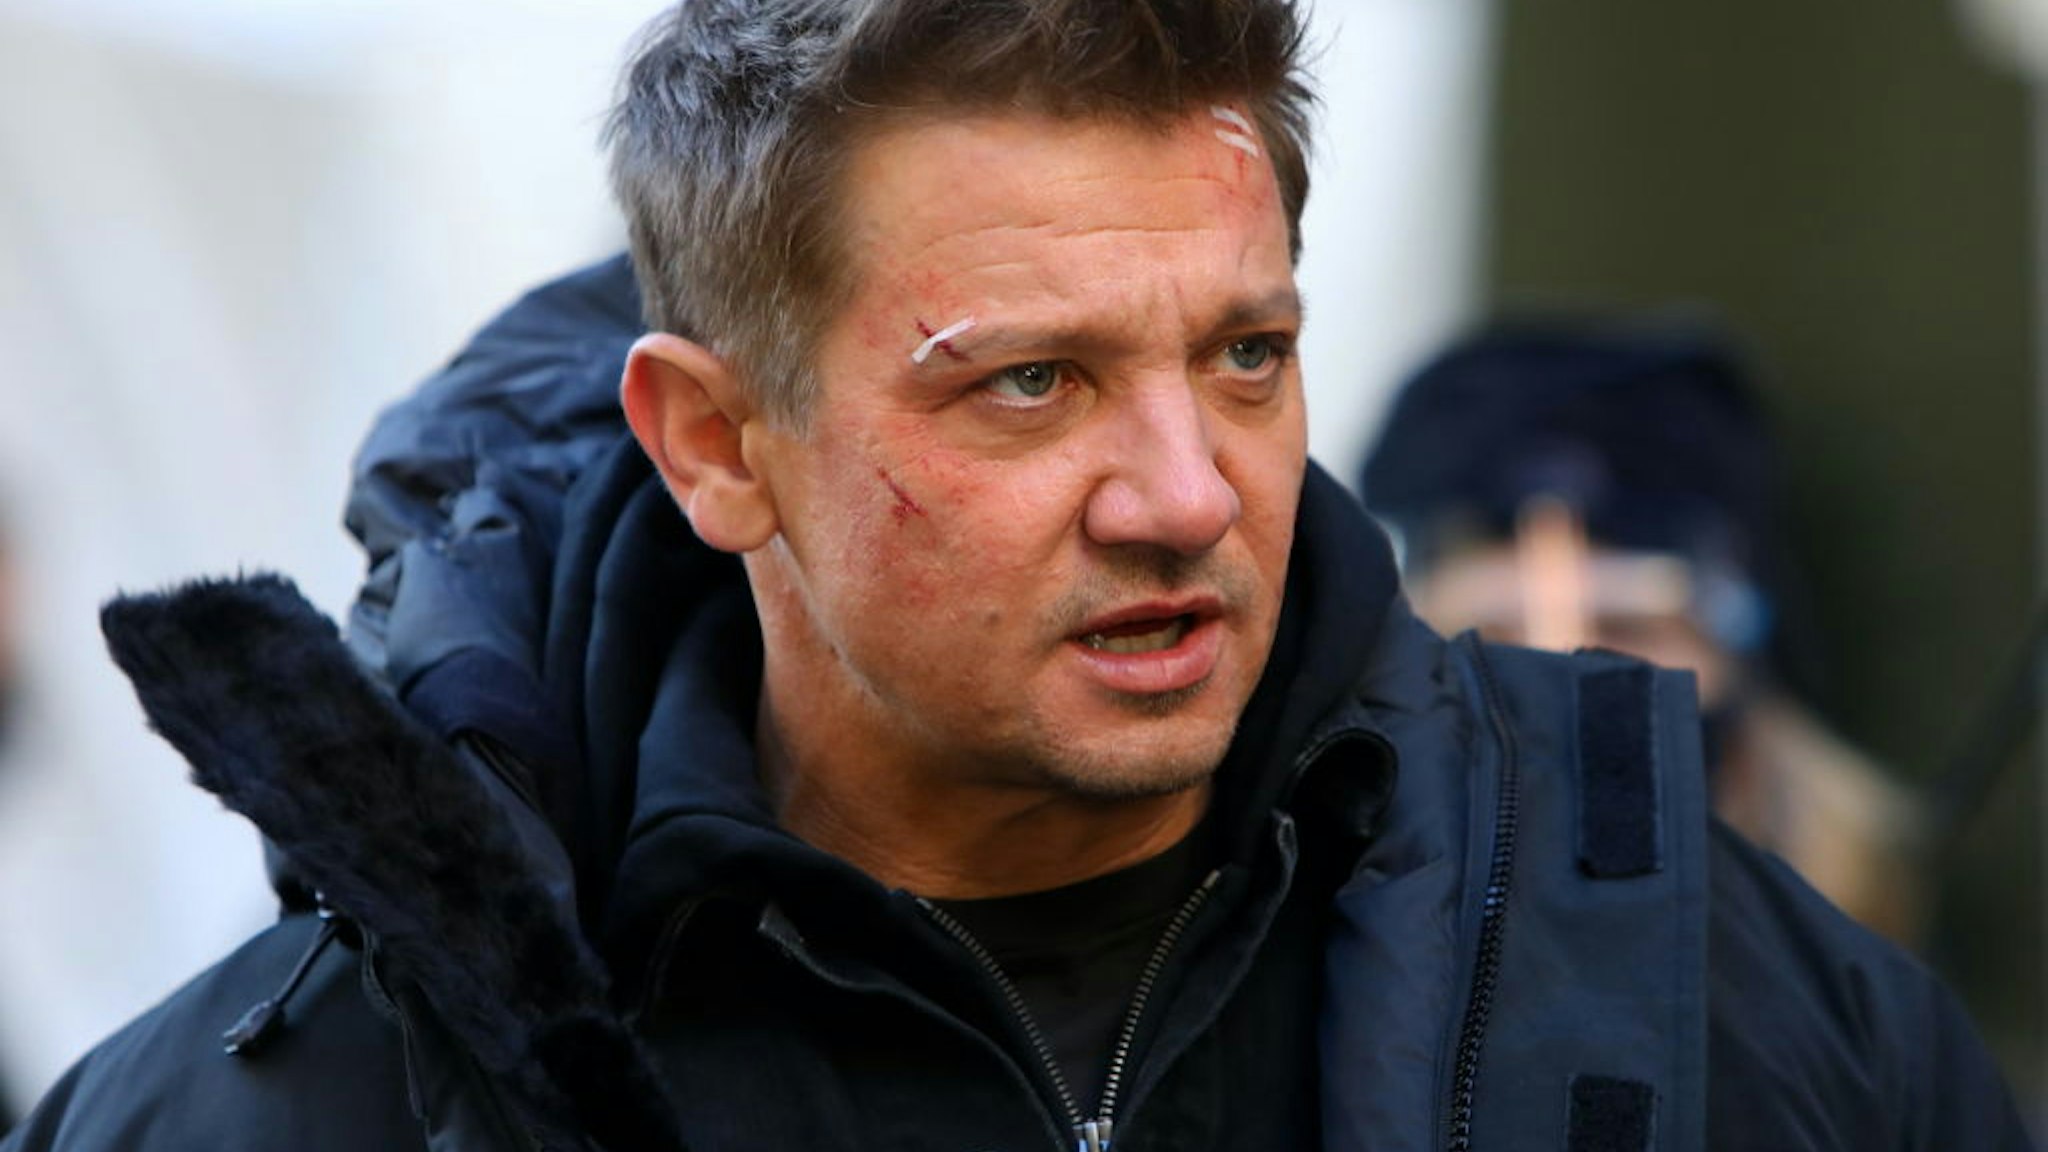 NEW YORK, NY - DECEMBER 06: Jeremy Renner is seen on set of "Hawkeye" on December 06, 2020 in New York City. (Photo by Jose Perez/Bauer-Griffin/GC Images)